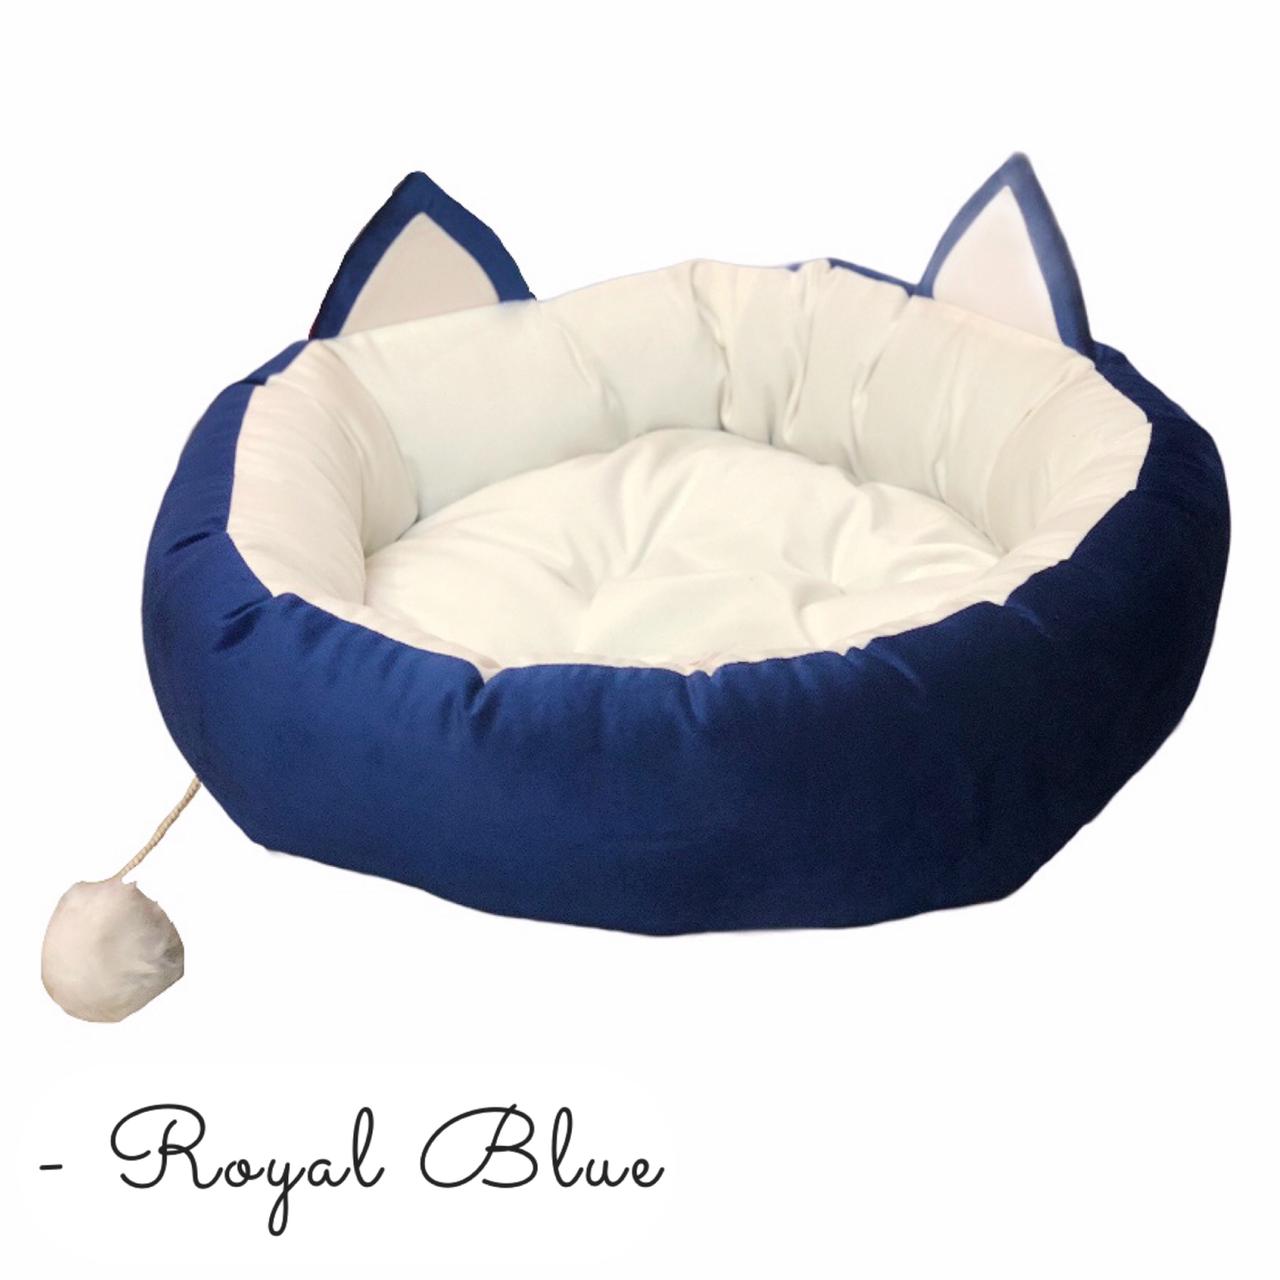 CAT EARS PET BED WITH TAIL